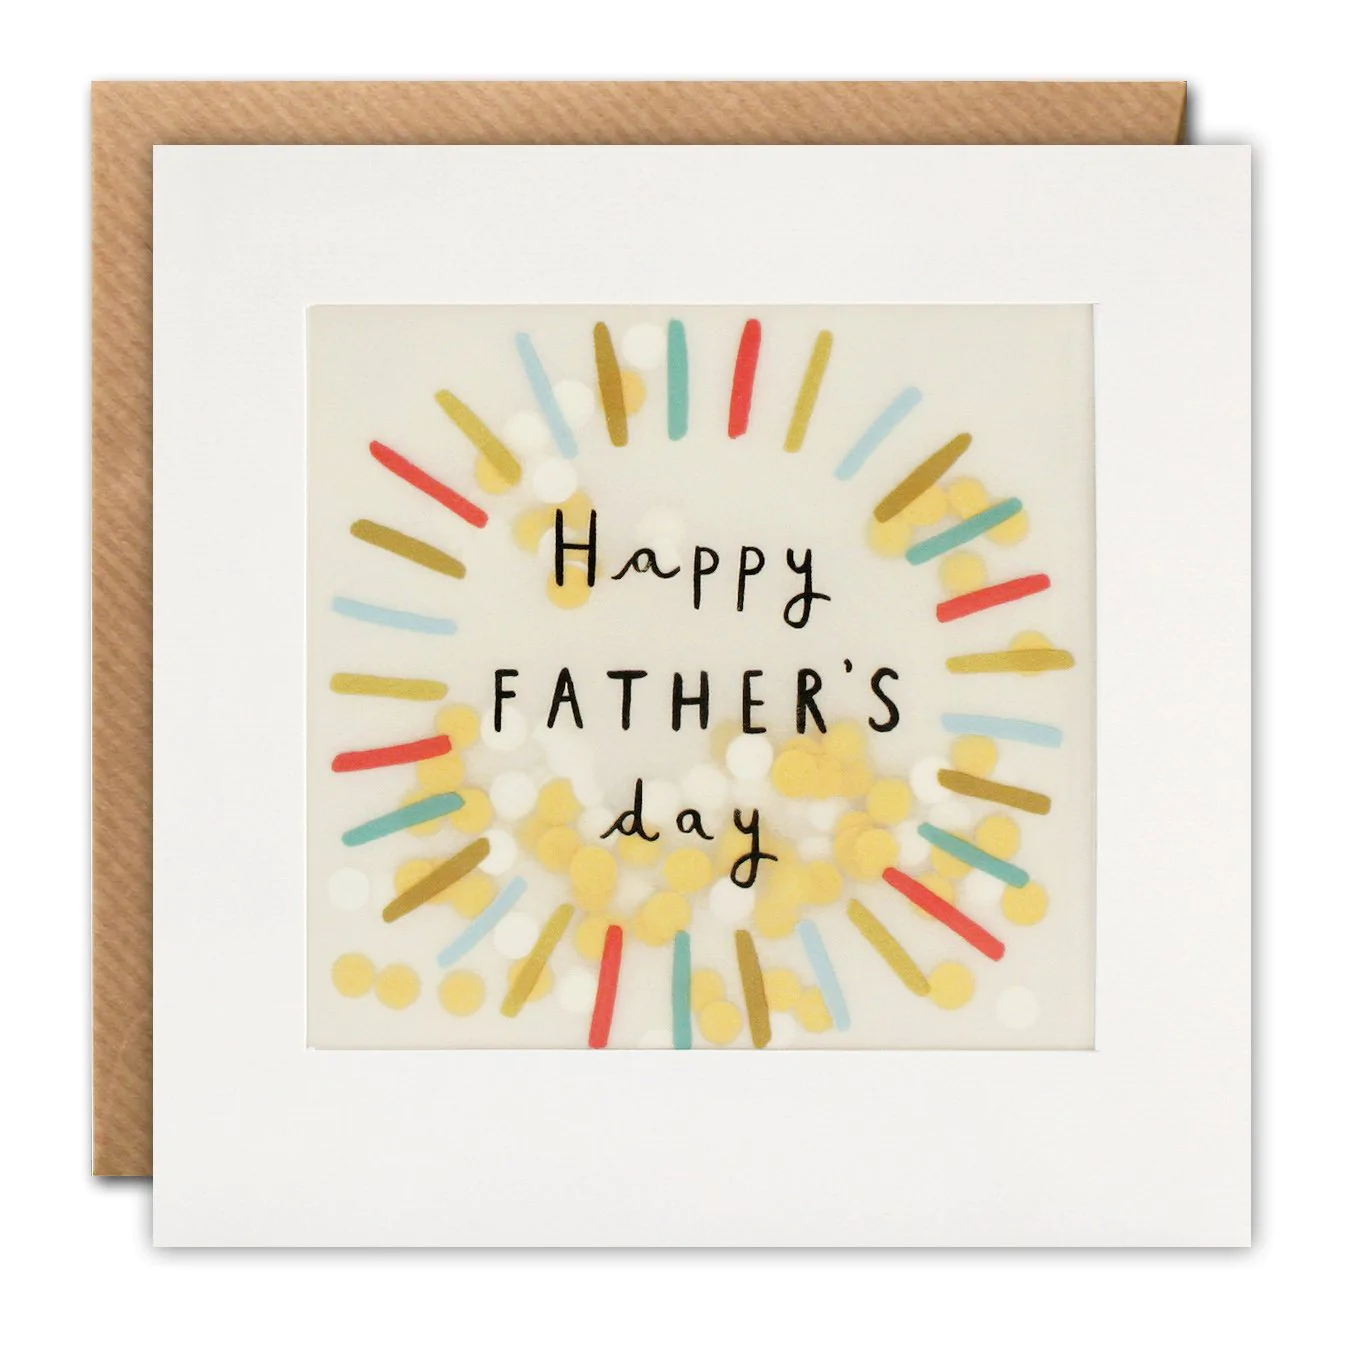 father's day shakies card by james ellis